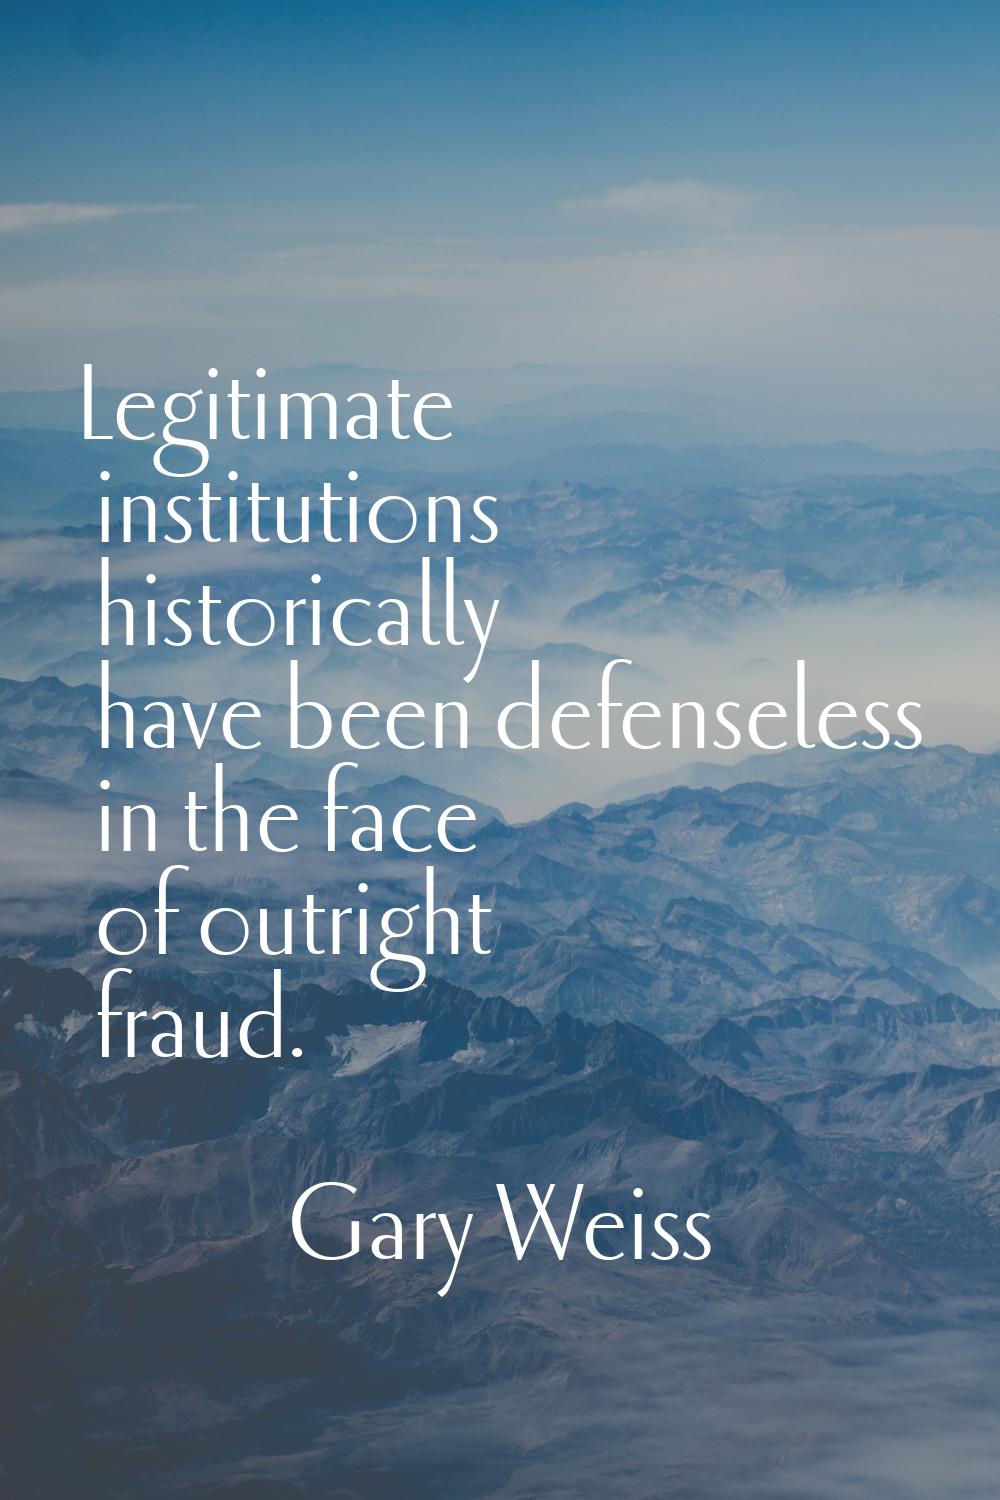 Legitimate institutions historically have been defenseless in the face of outright fraud.